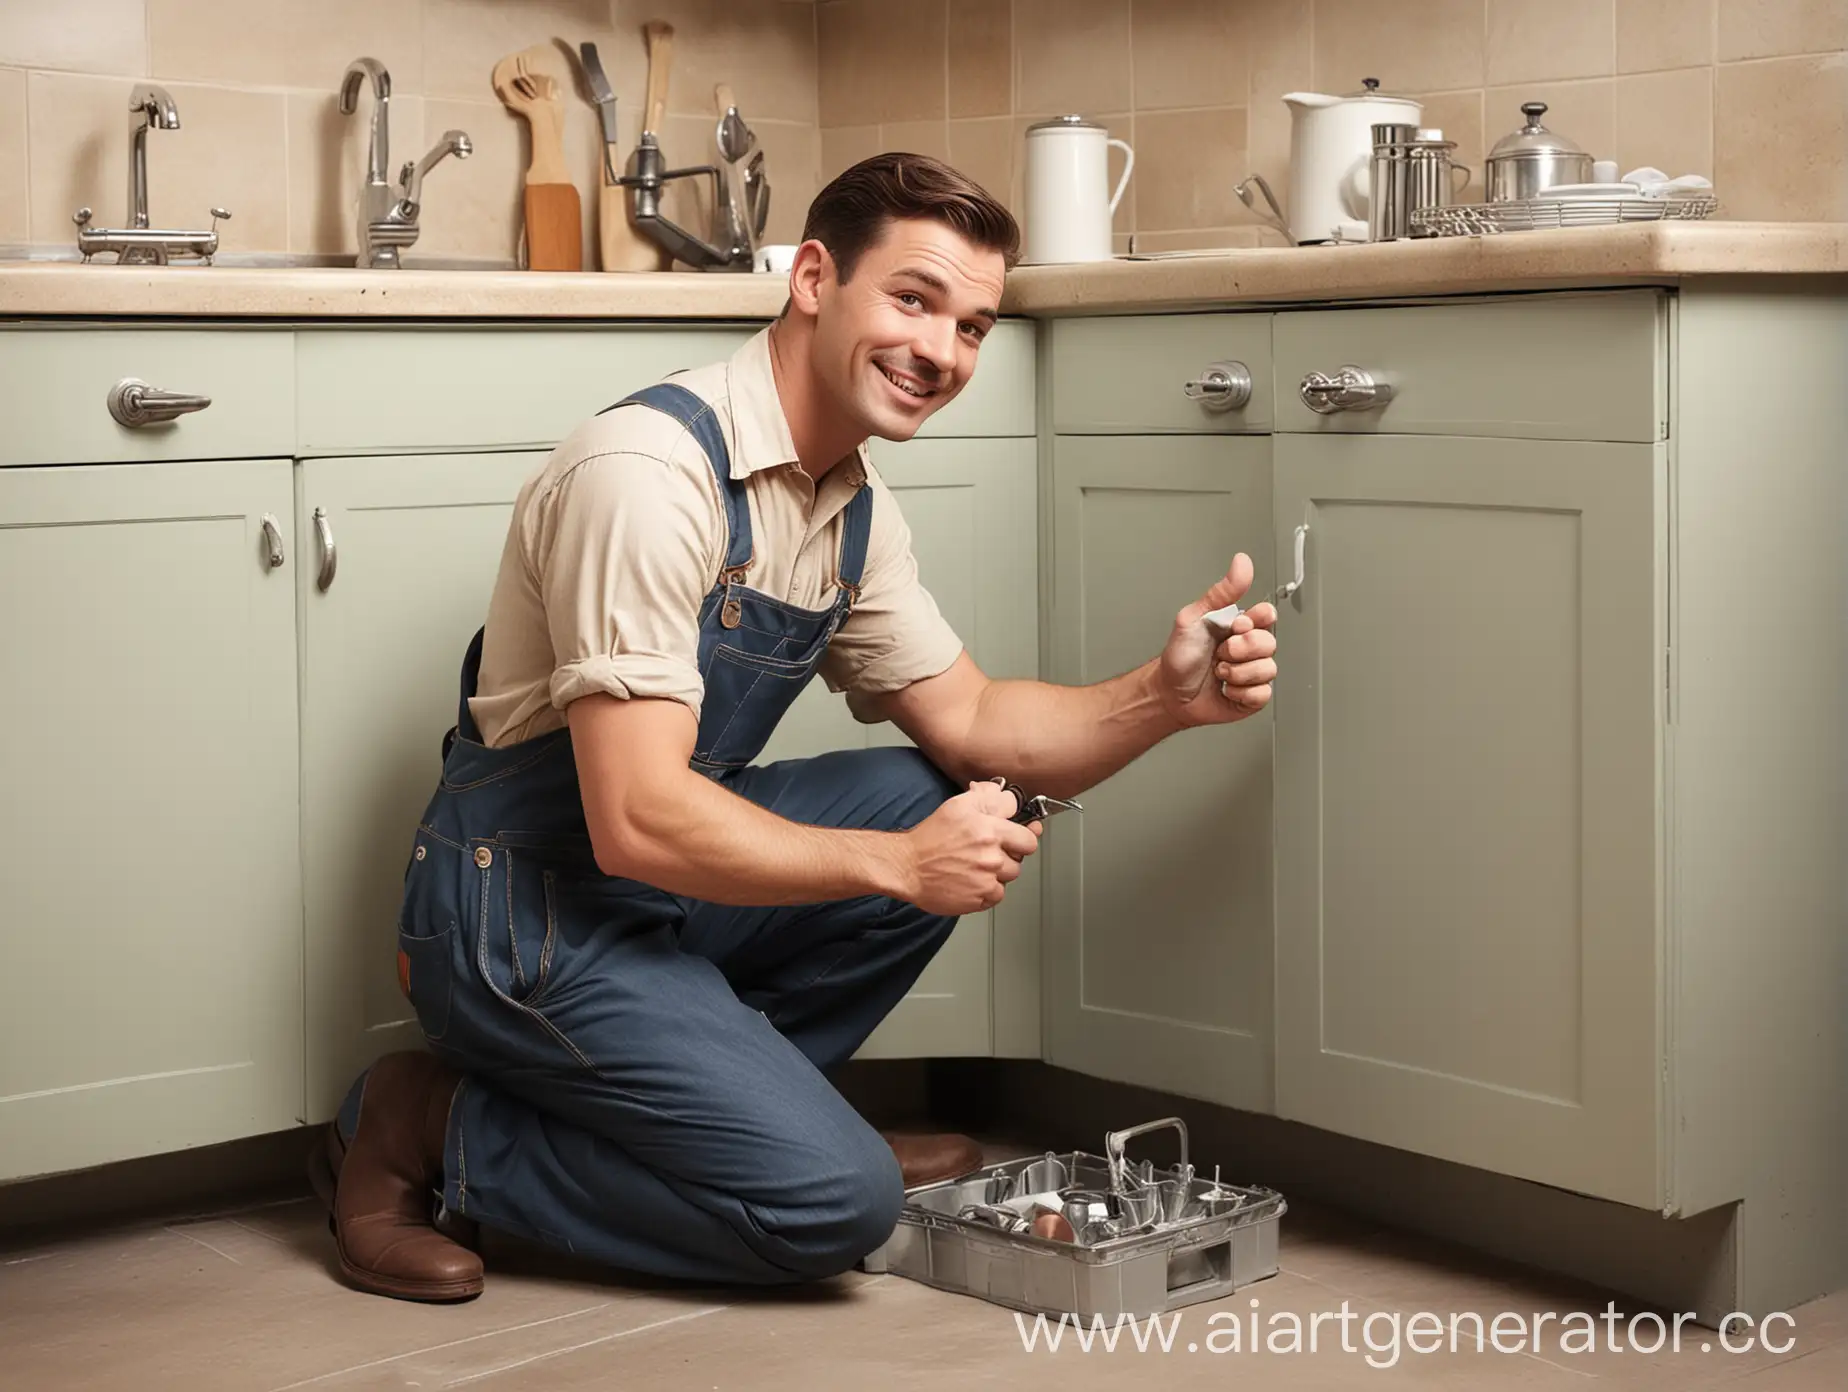 A Disney-style 1930s repairman fixing a dishwasher in a minimalist style, as a single object, with minimal details and a strong focus on the repairman's character and tools. The repairman should be depicted in a clear and well-lit environment with a transparent background.
The repairman should have soft, rounded features and a friendly expression, reminiscent of classic Disney characters. The color palette should be vibrant and cheerful, using the same color scheme as classic Disney cartoons.
The repairman should be wearing overalls and a cap, and should be holding a toolbox and other repair tools. The dishwasher should be a simple, classic design, with minimal details.
The overall style should be clean and graphic, with a focus on bold lines and shapes. The image should have a sense of depth and perspective, but should avoid being too cluttered or detailed.
You can experiment with different poses for the repairman, such as standing, kneeling, or sitting.
You can also add some small details to the environment, such as a workbench or a floor pattern, but make sure they don't distract from the main focus of the image.
You can use specific keywords to describe the style of the image, such as "retro", "vintage", or "cartoon".
The more specific you are with your prompts, the better results you will get.
A Disney-style 1930s repairman with a friendly smile, wearing overalls and a cap, fixing a dishwasher with a toolbox and other repair tools. The image should have a transparent background and a minimalist style.
A close-up view of a Disney-style 1930s repairman's hands, carefully repairing a dishwasher. The focus should be on the repairman's hands and the tools he is using.
A Disney-style 1930s repairman standing triumphantly next to a repaired dishwasher, giving a thumbs up. The image should have a cheerful and optimistic atmosphere.